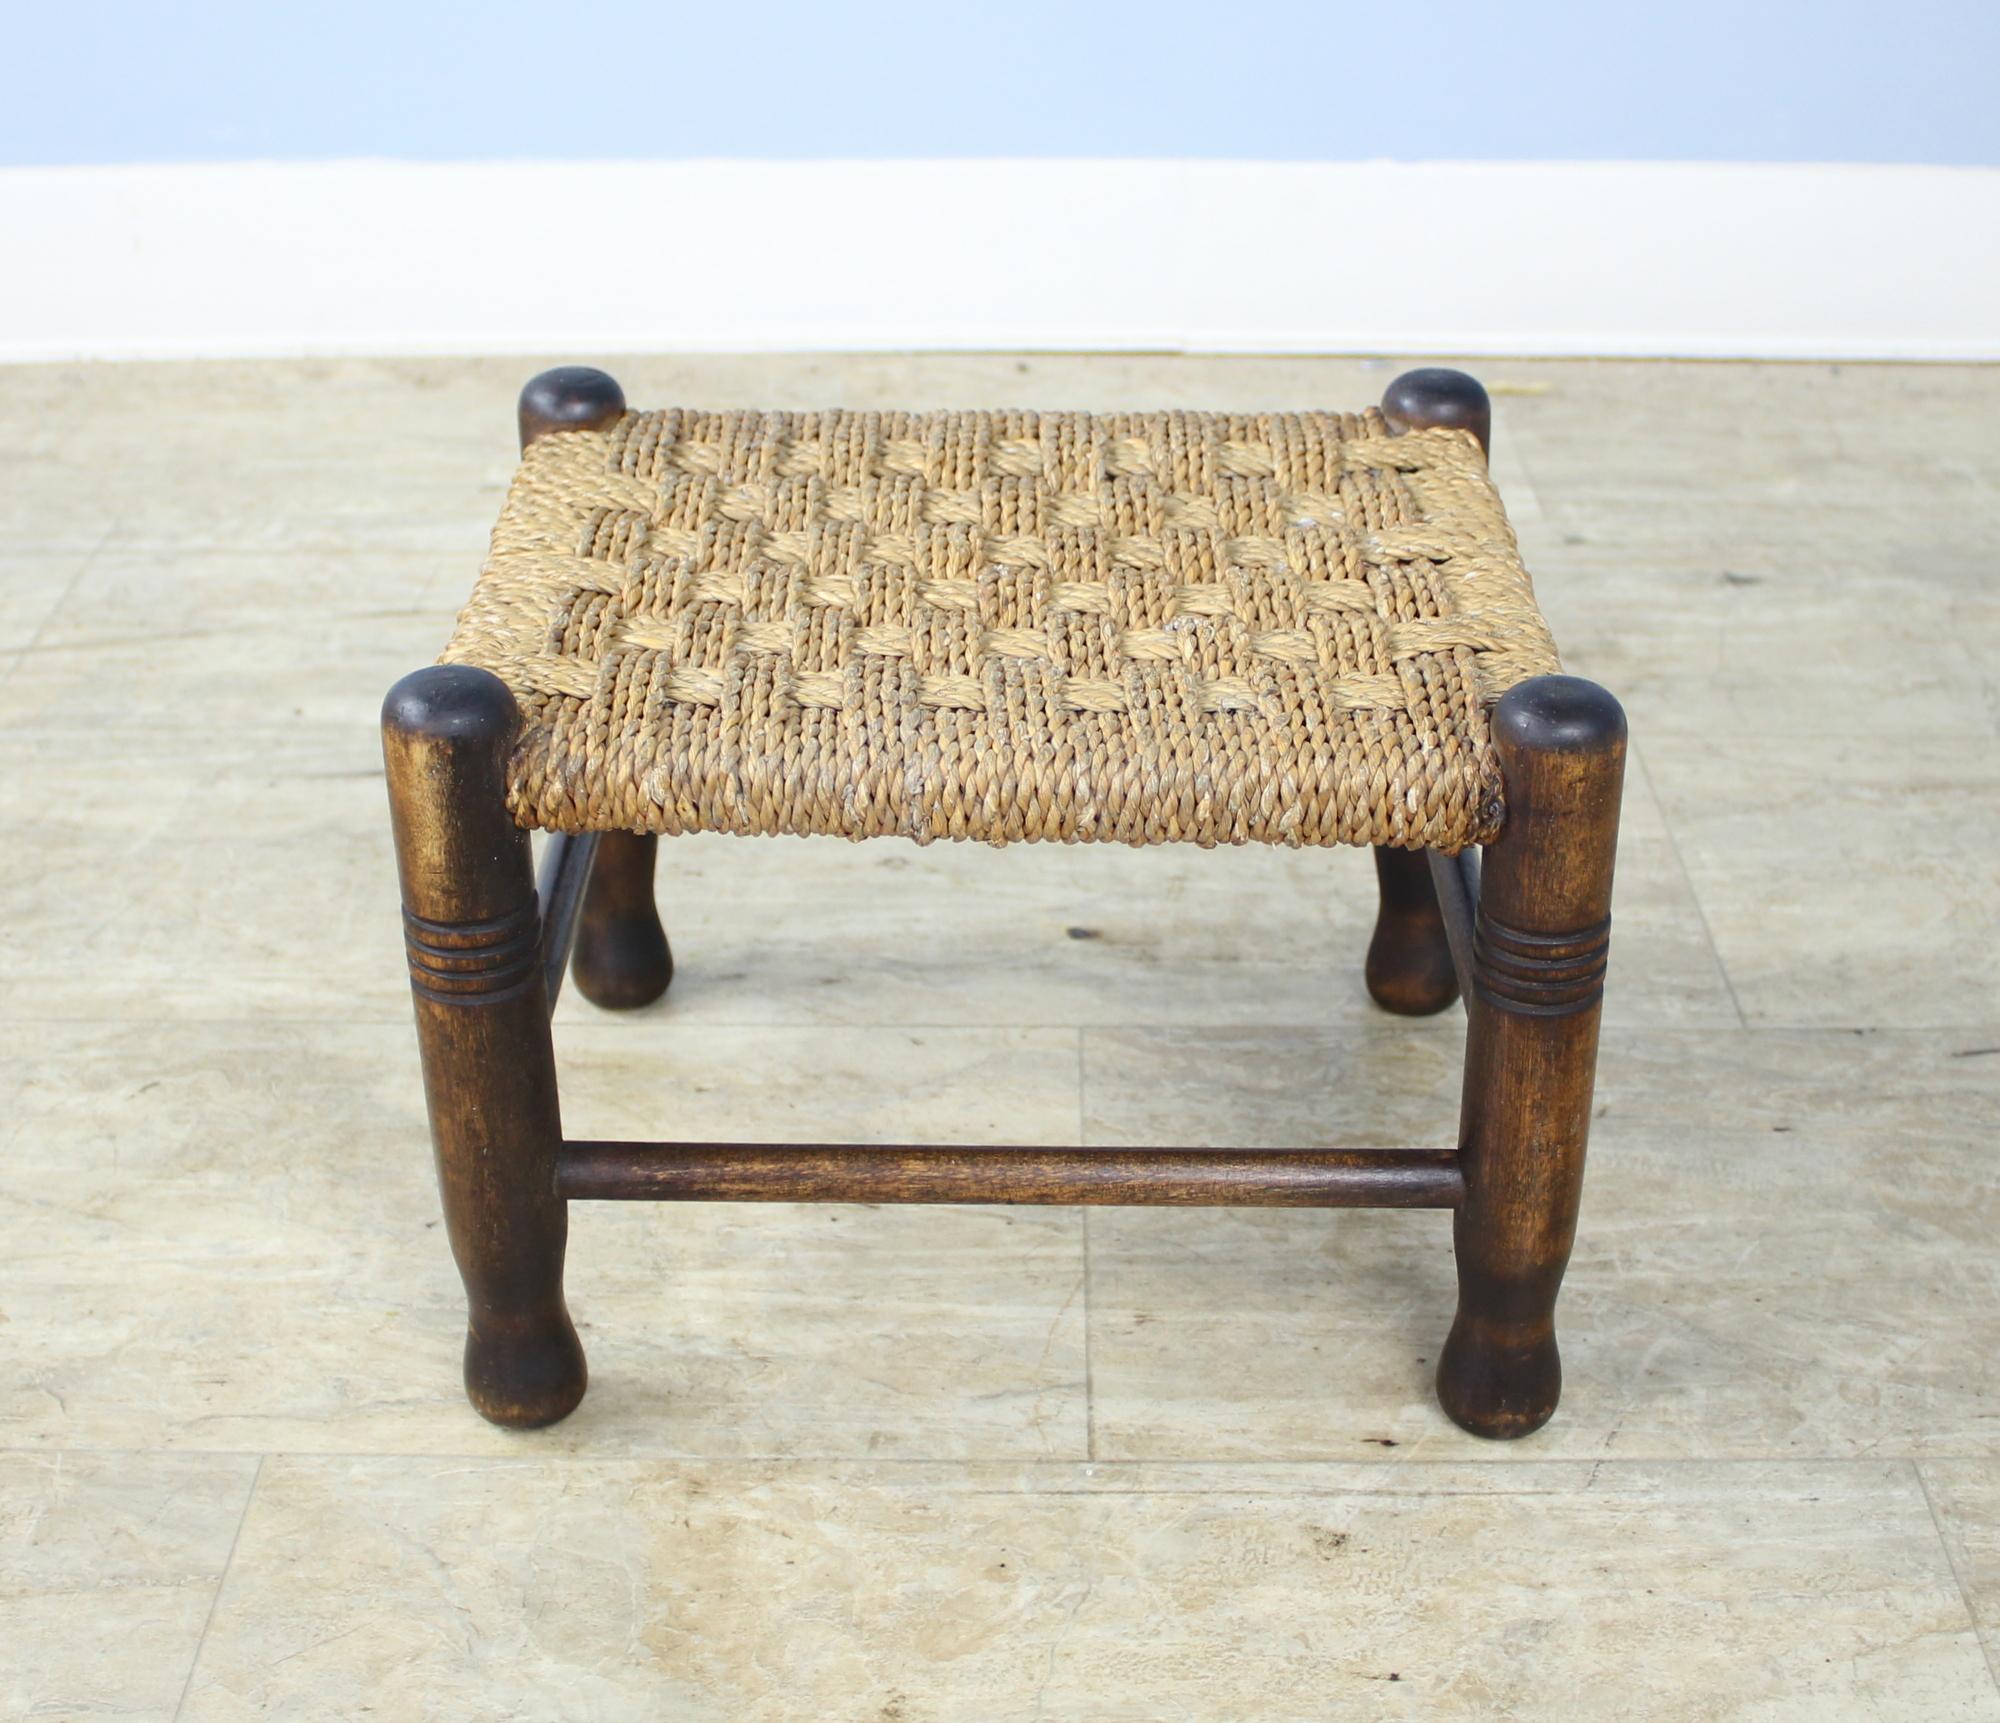 A sweet little string stool, perfect for the bedroom, living room or as a perch by the fireplace. Nice carved detail and interesting wear on the legs. A little gem!